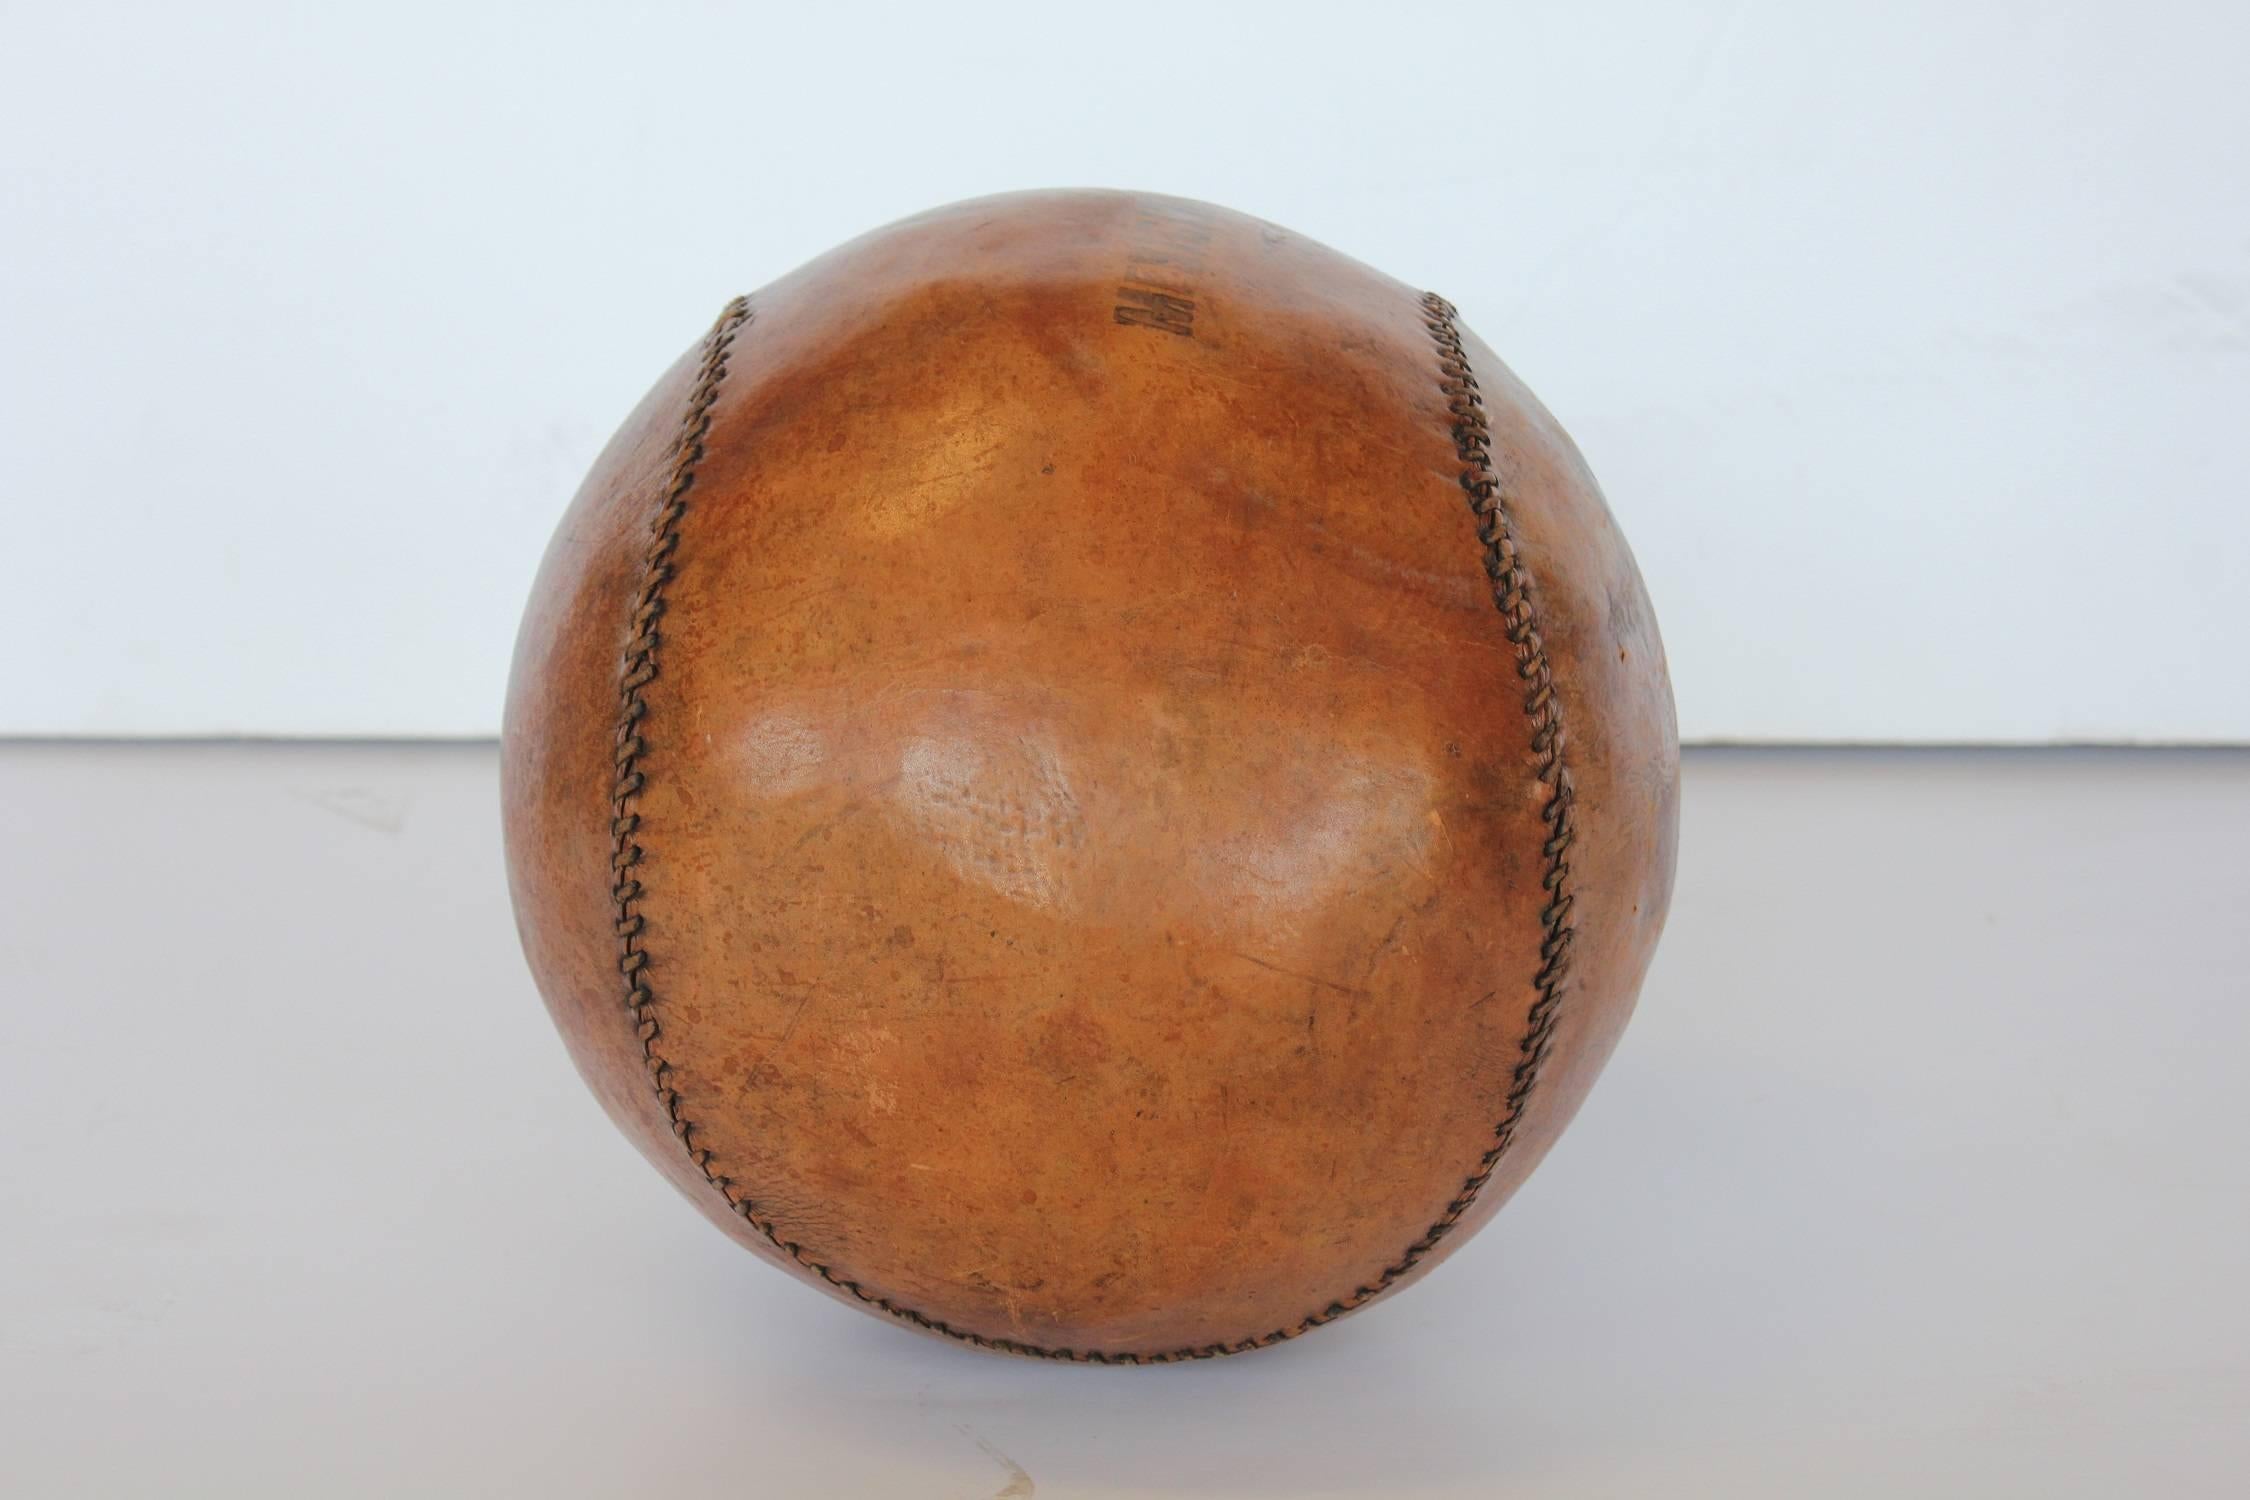 1950s hand-stitched leather medicine ball.